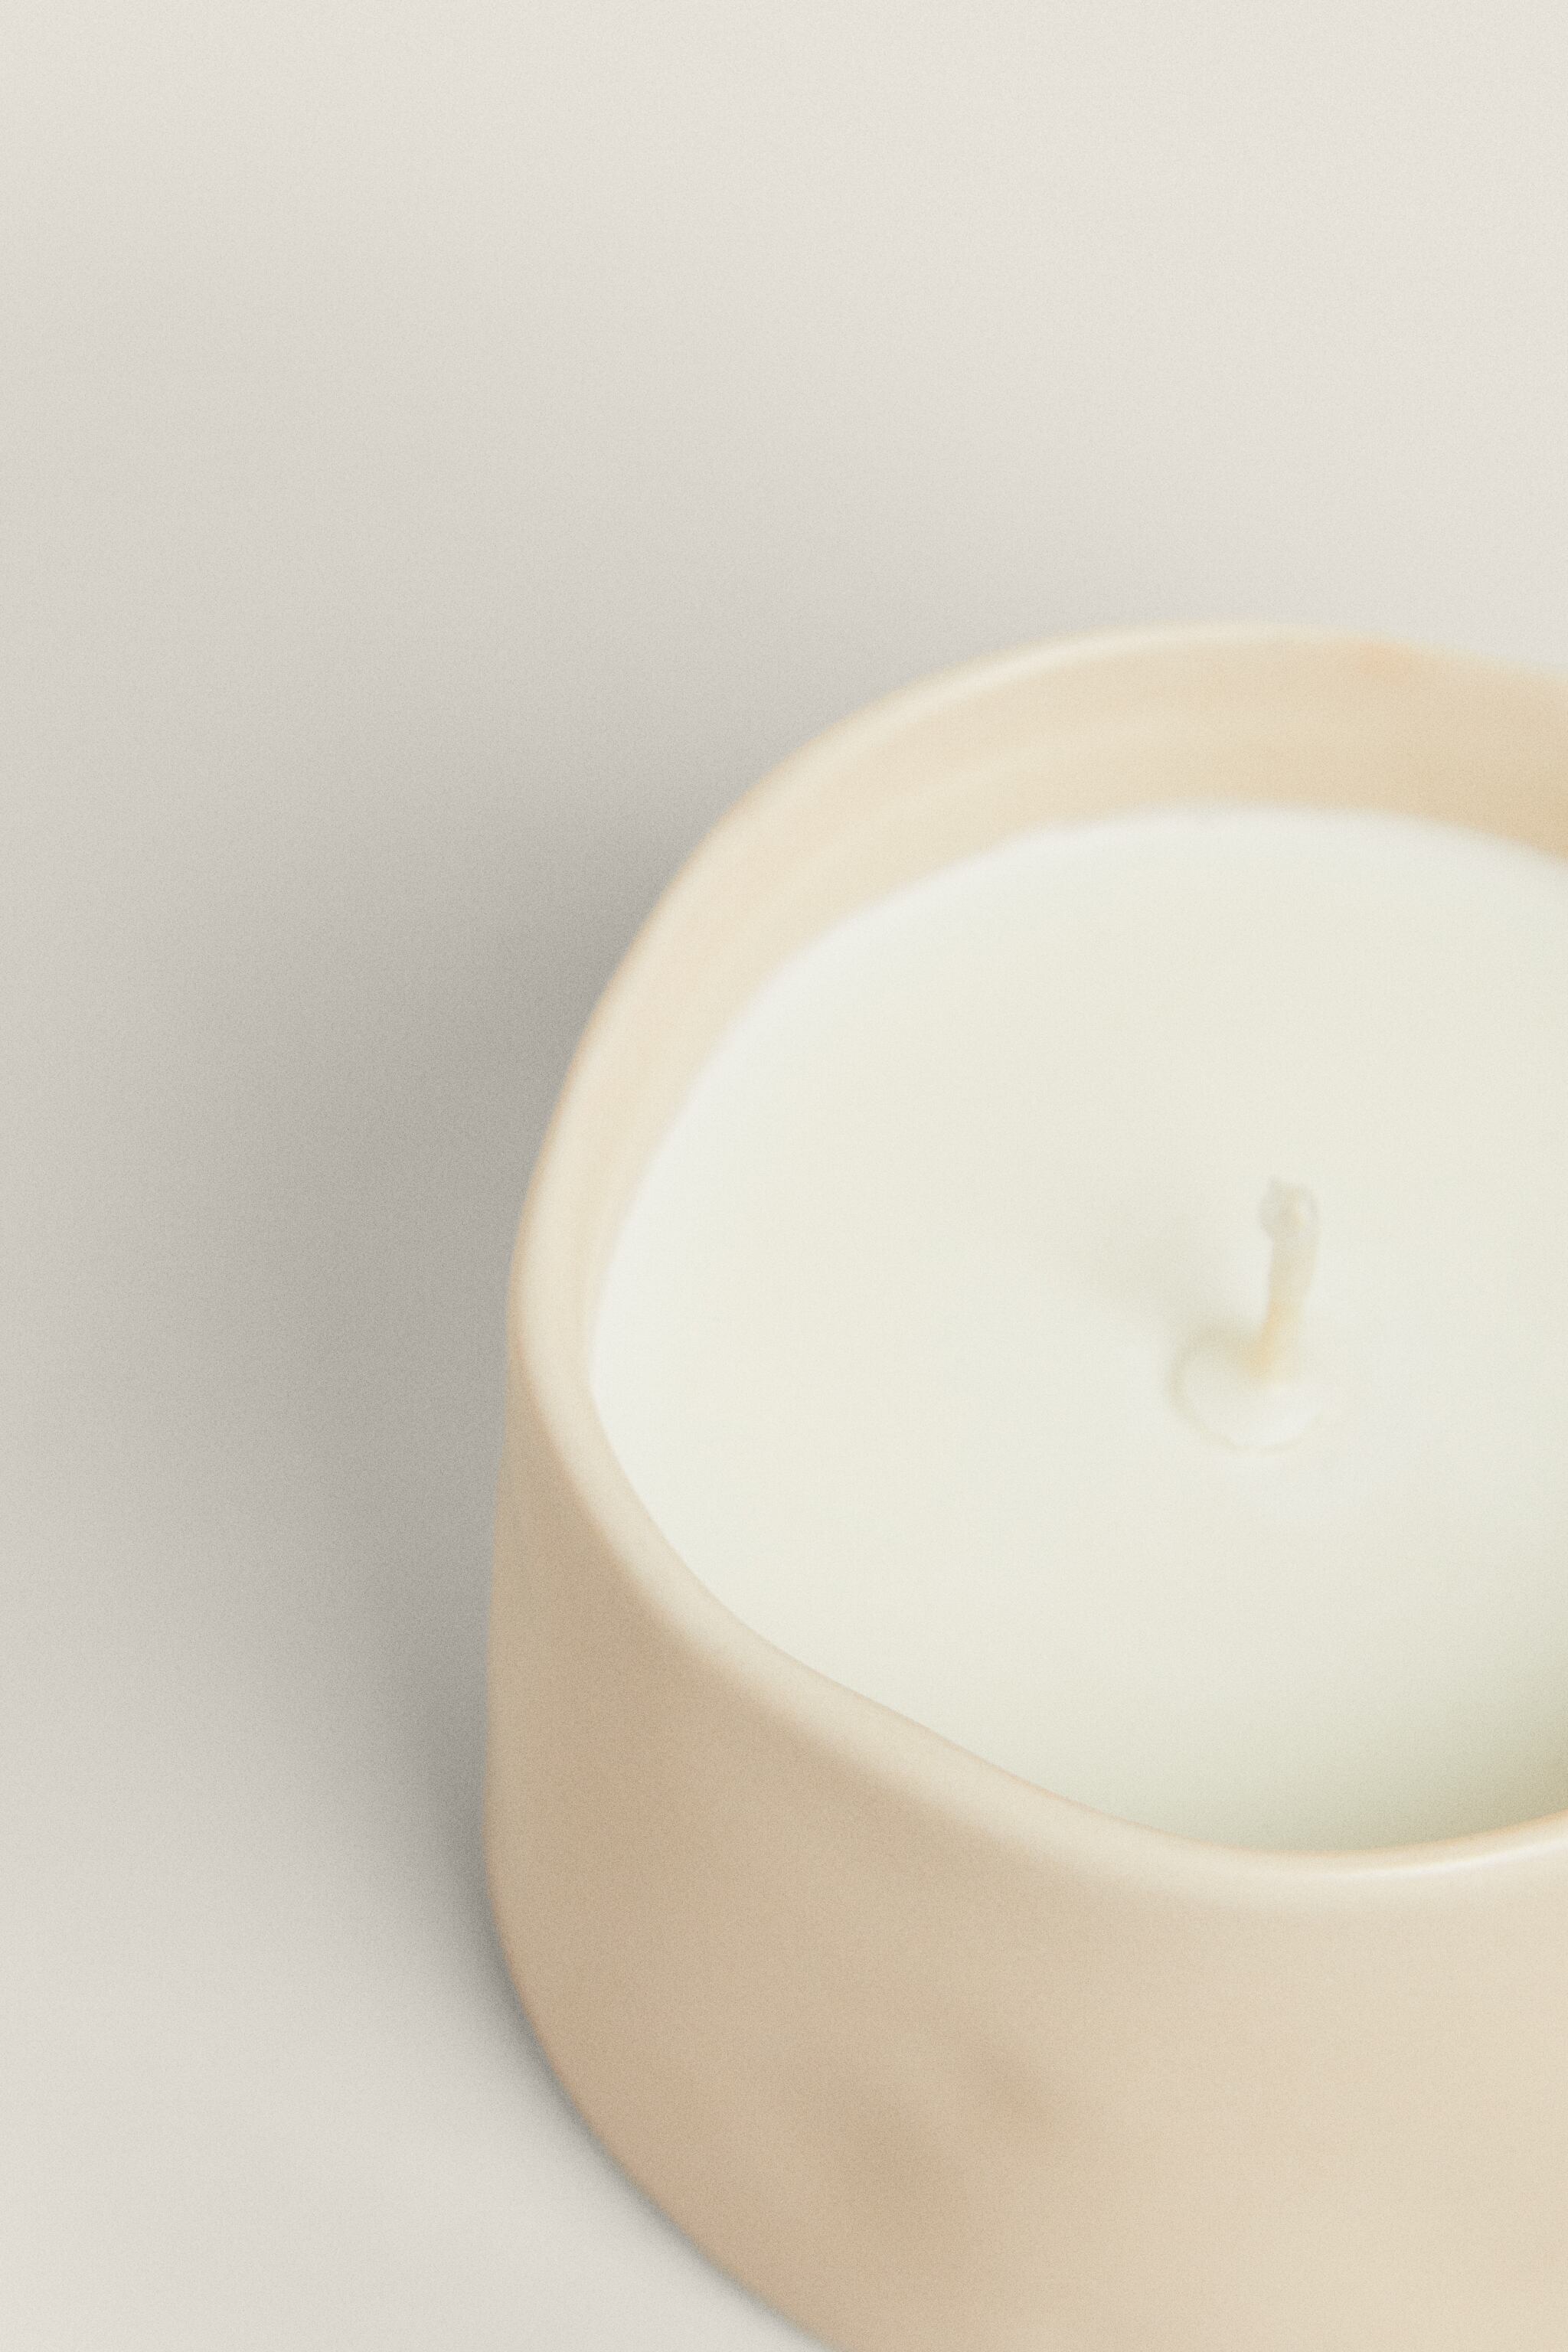 G) FLORAL TONKA SCENTED CANDLE